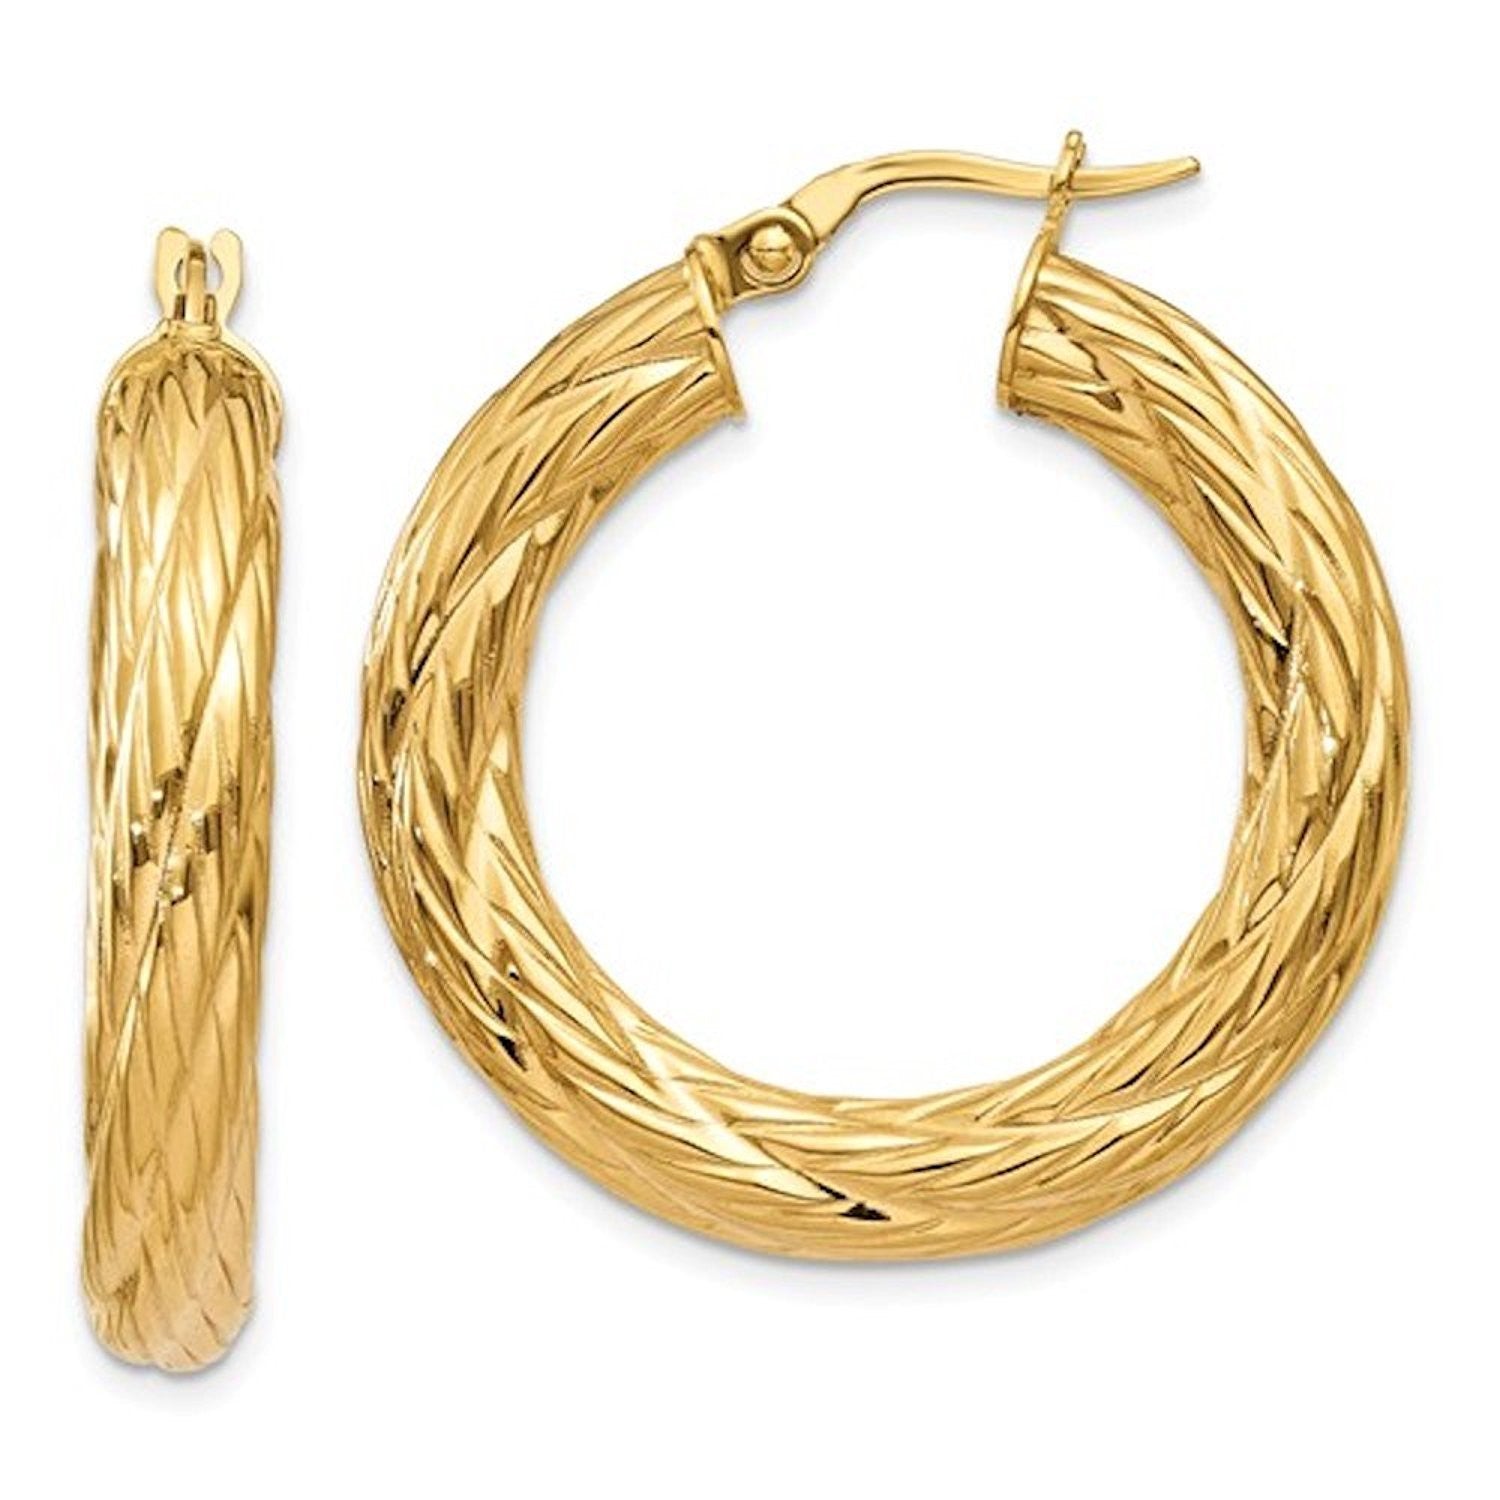 14K Yellow Gold 30mm x 4.5mm Textured Round Hoop Earrings